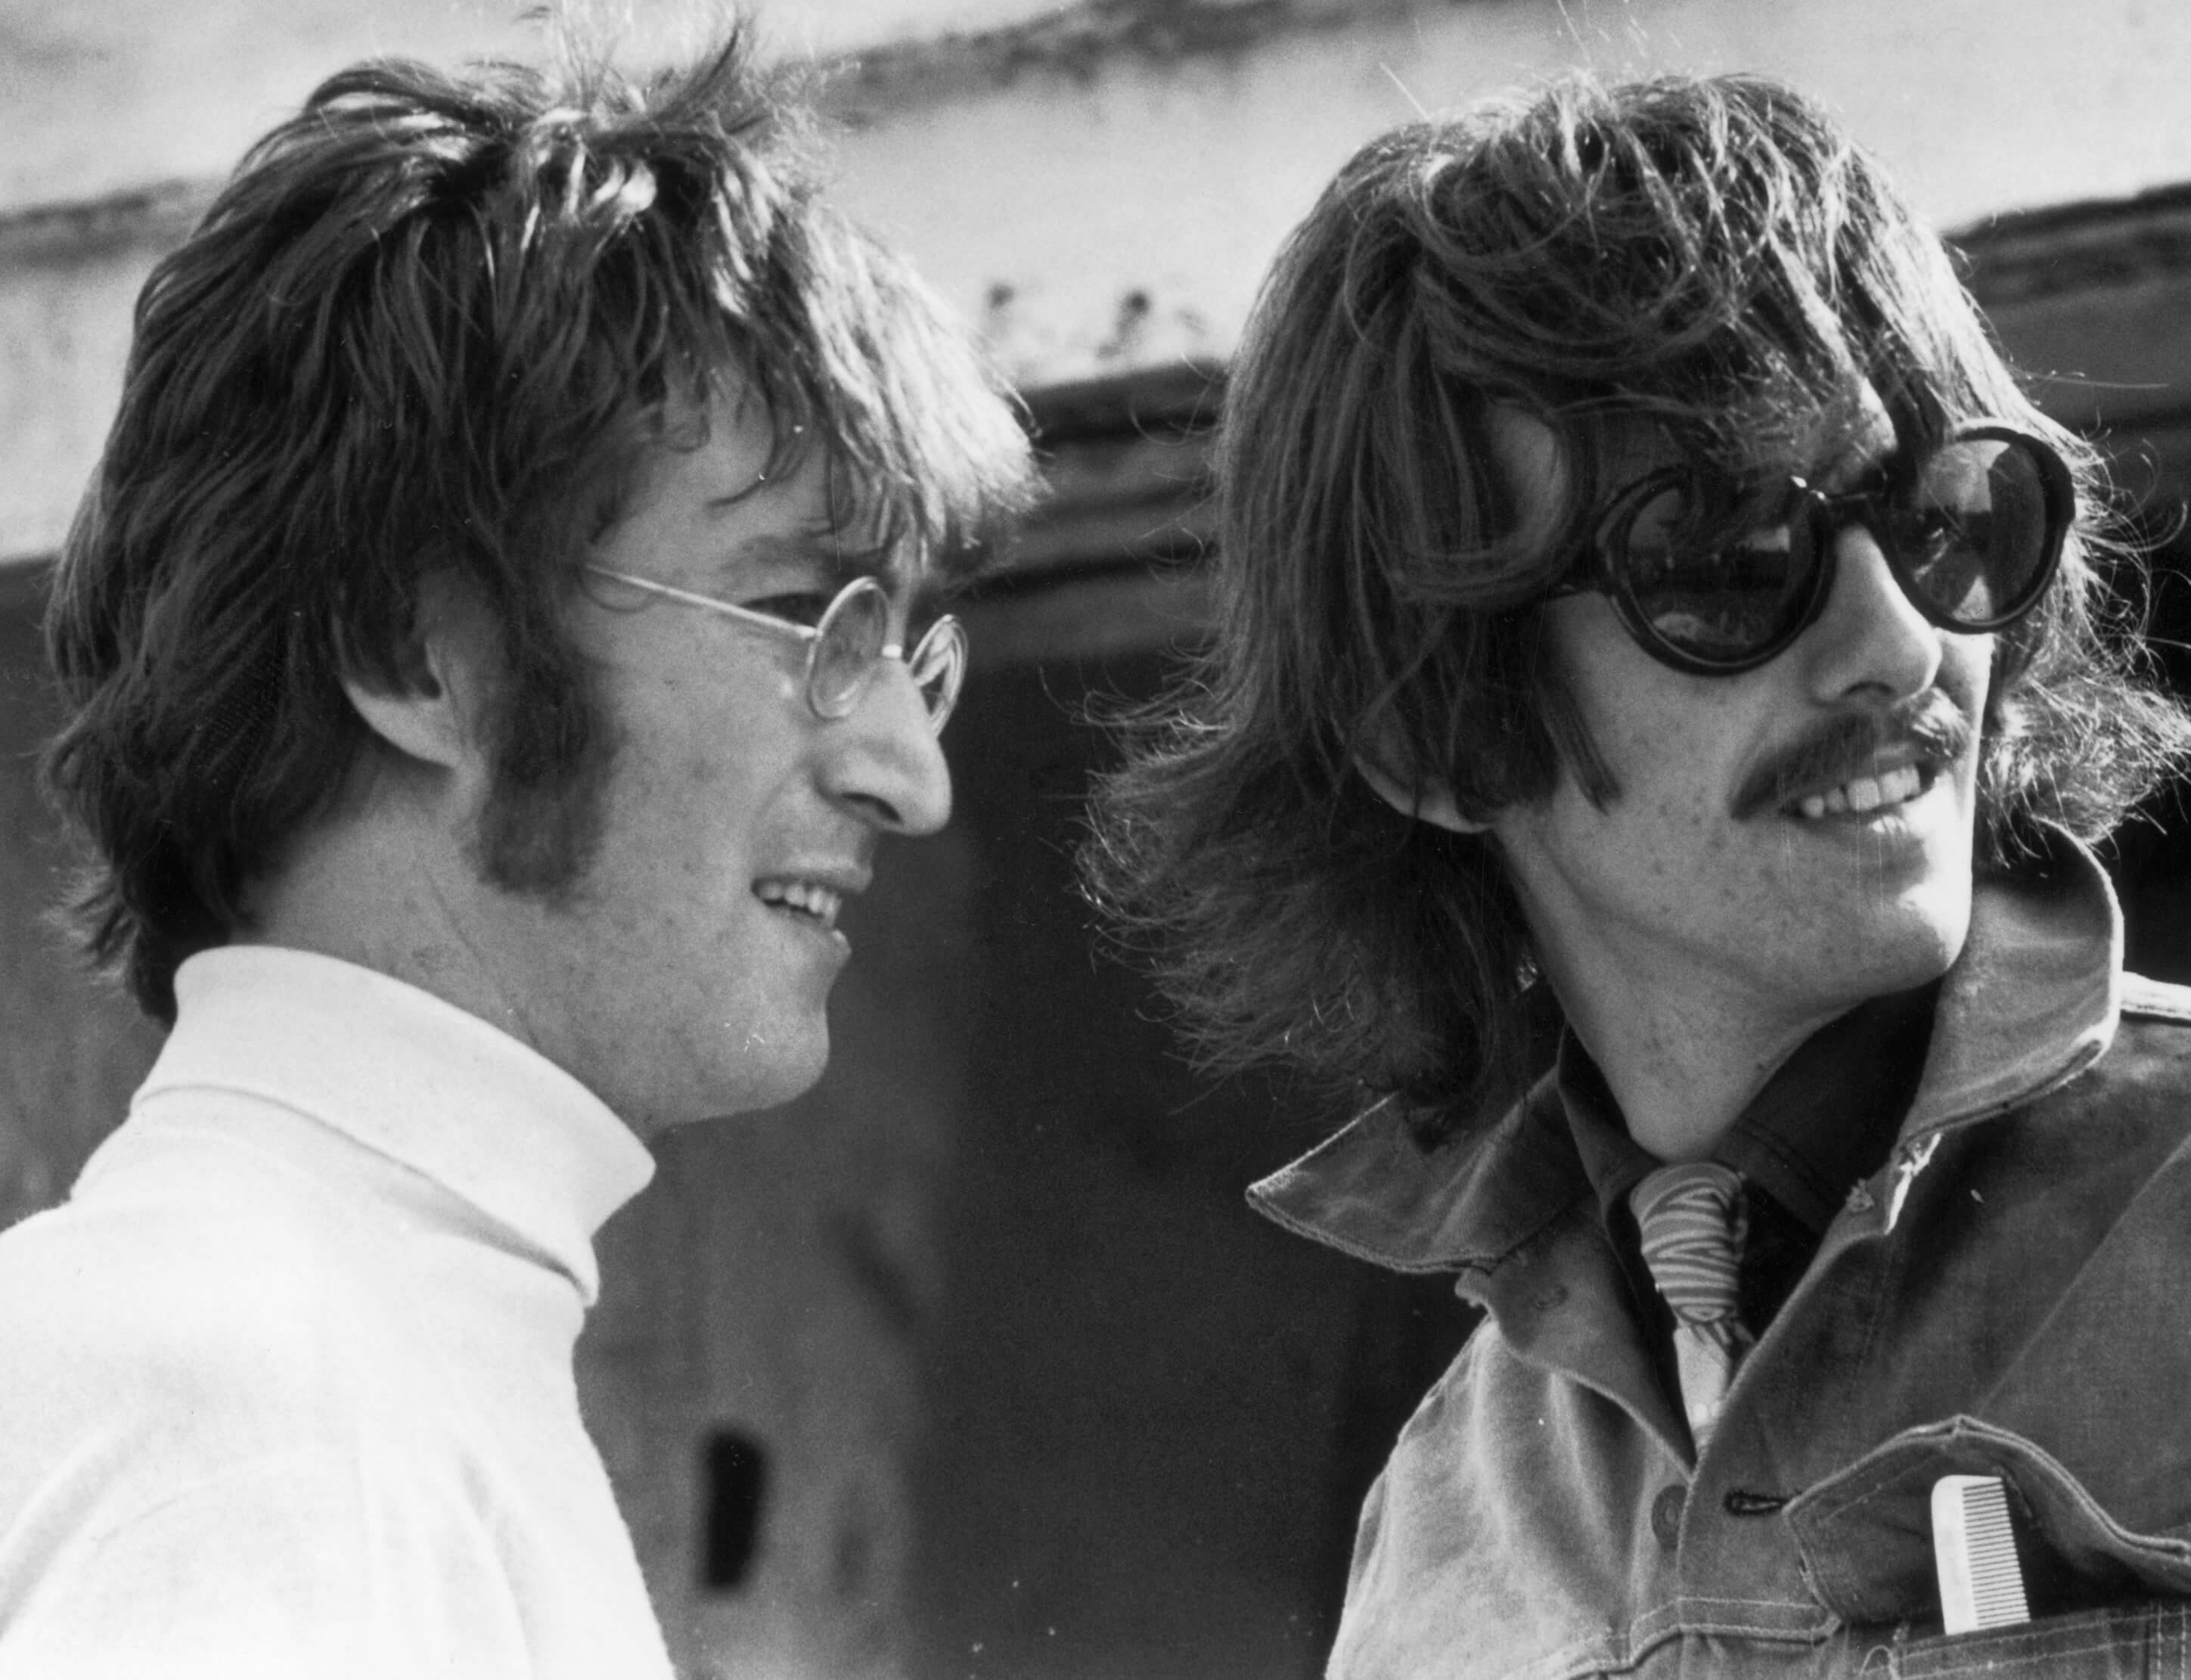 John Lennon and George Harrison in black-and-white